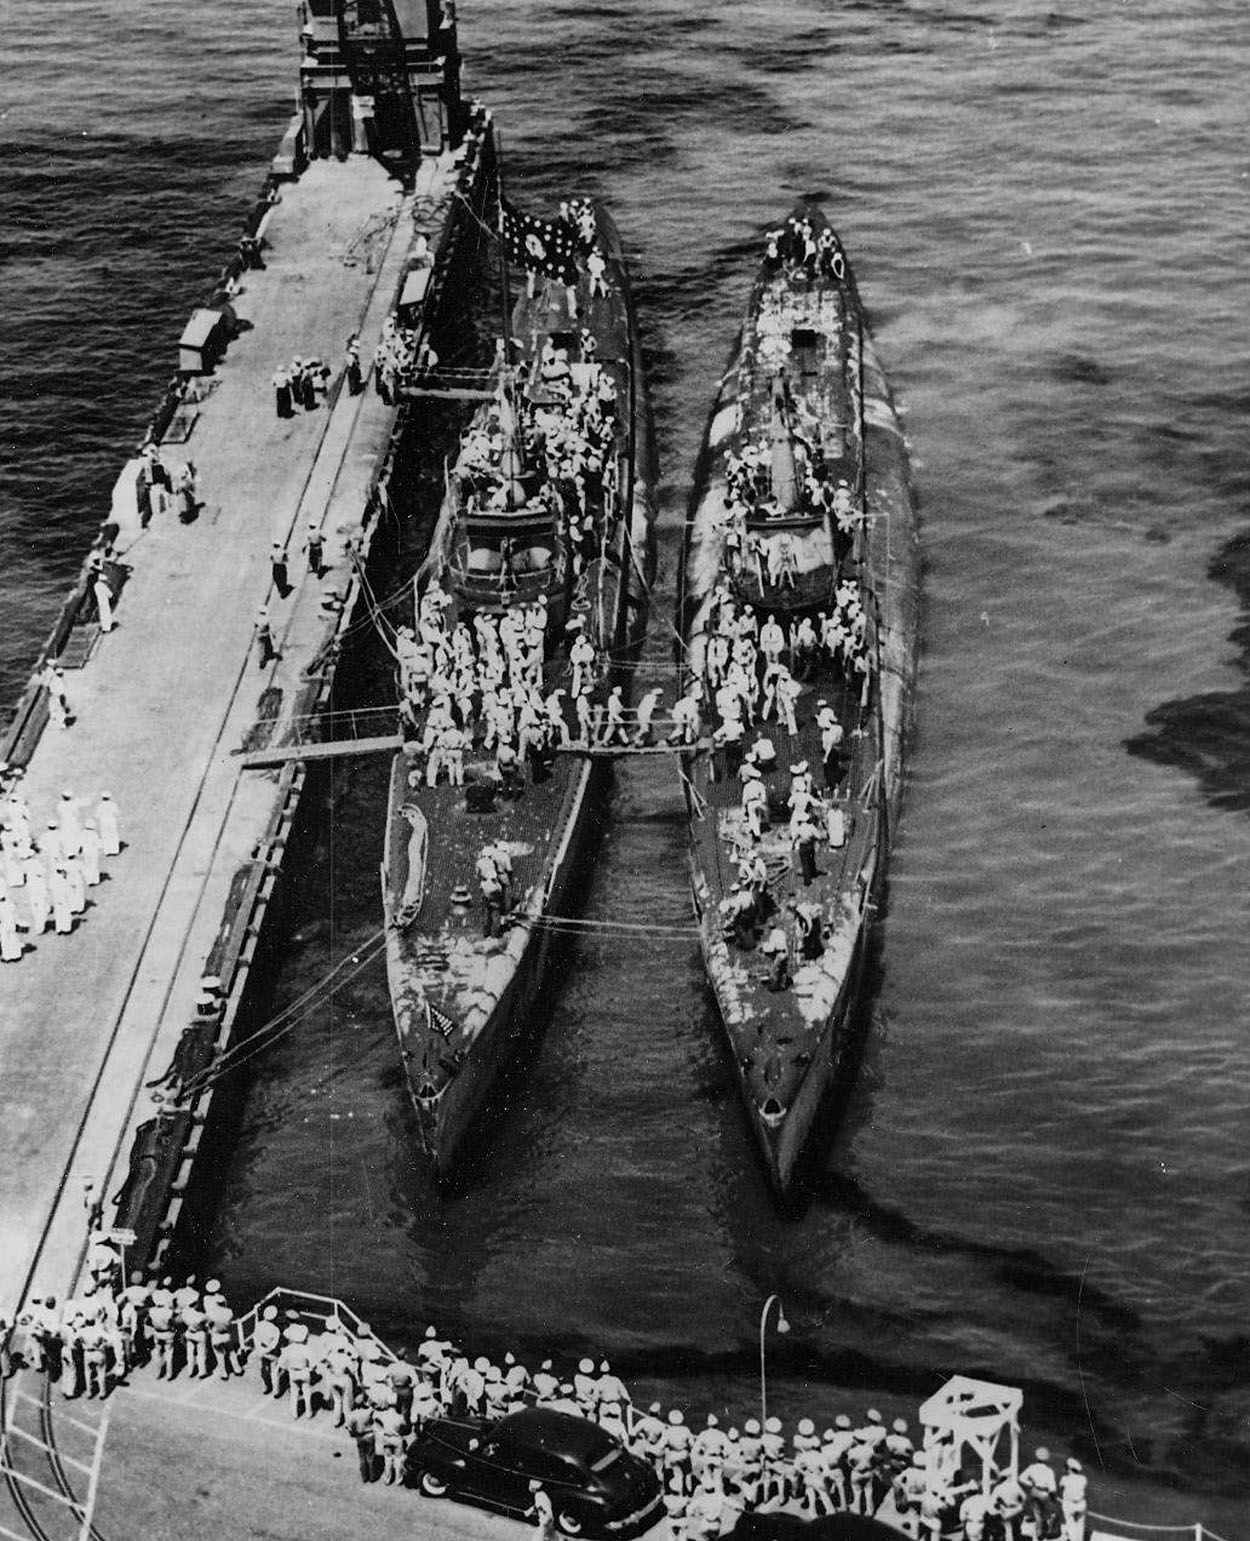 Two of Hydeman's Hellcats upon their return from Operation Barney: USS Flying Fish and USS Spadefish in port, Pearl Harbor, US Territory of Hawaii, 4 Jul 1945